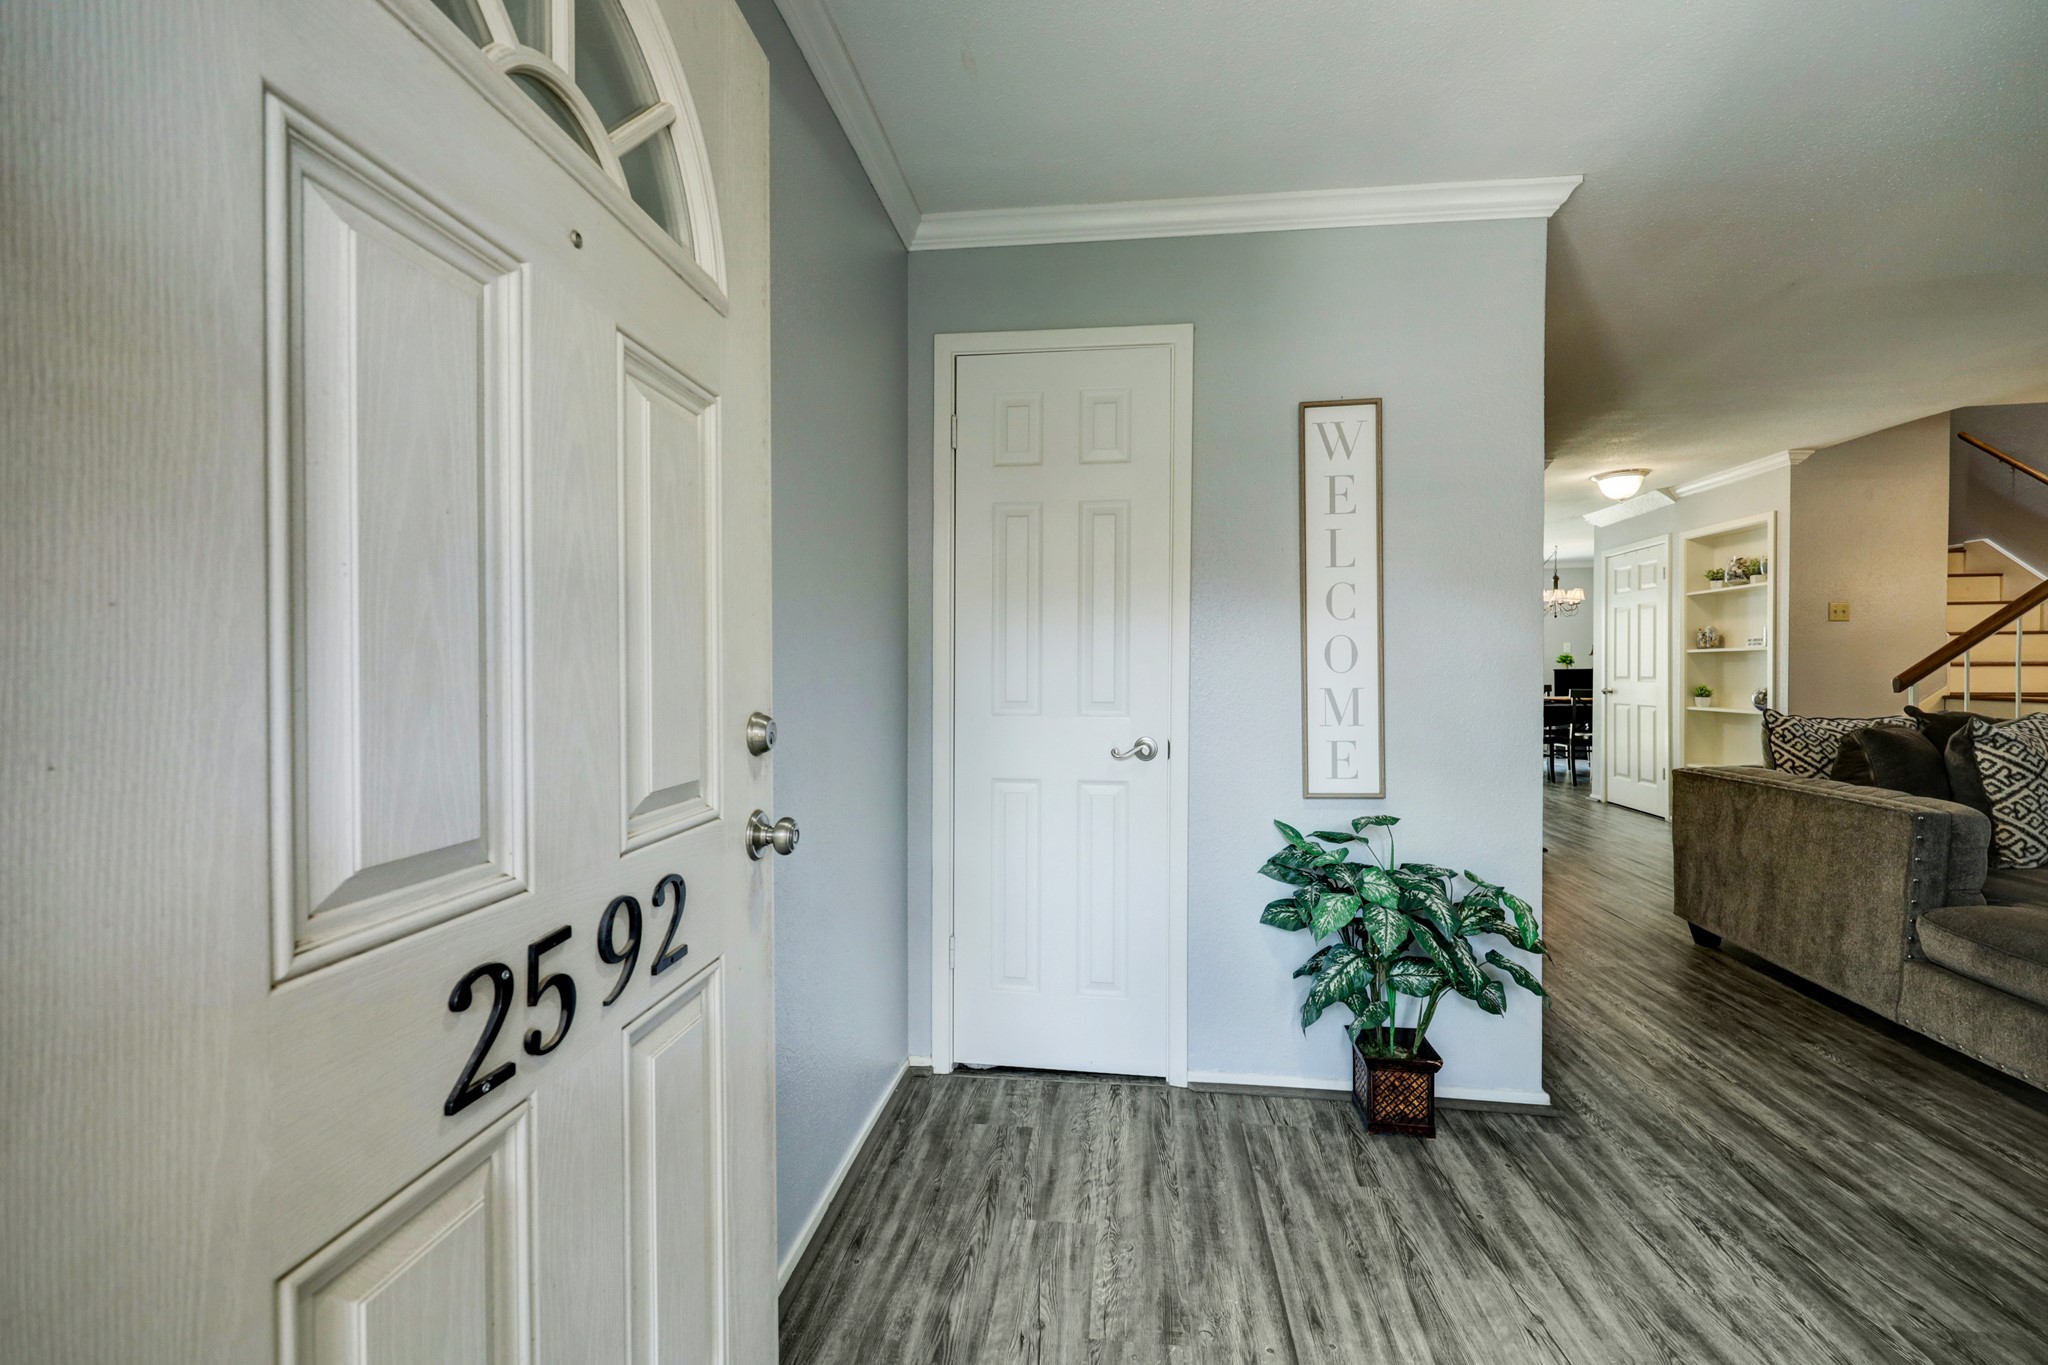 Step through the front door and into the large living room. Notice the conveniently located storage closet.